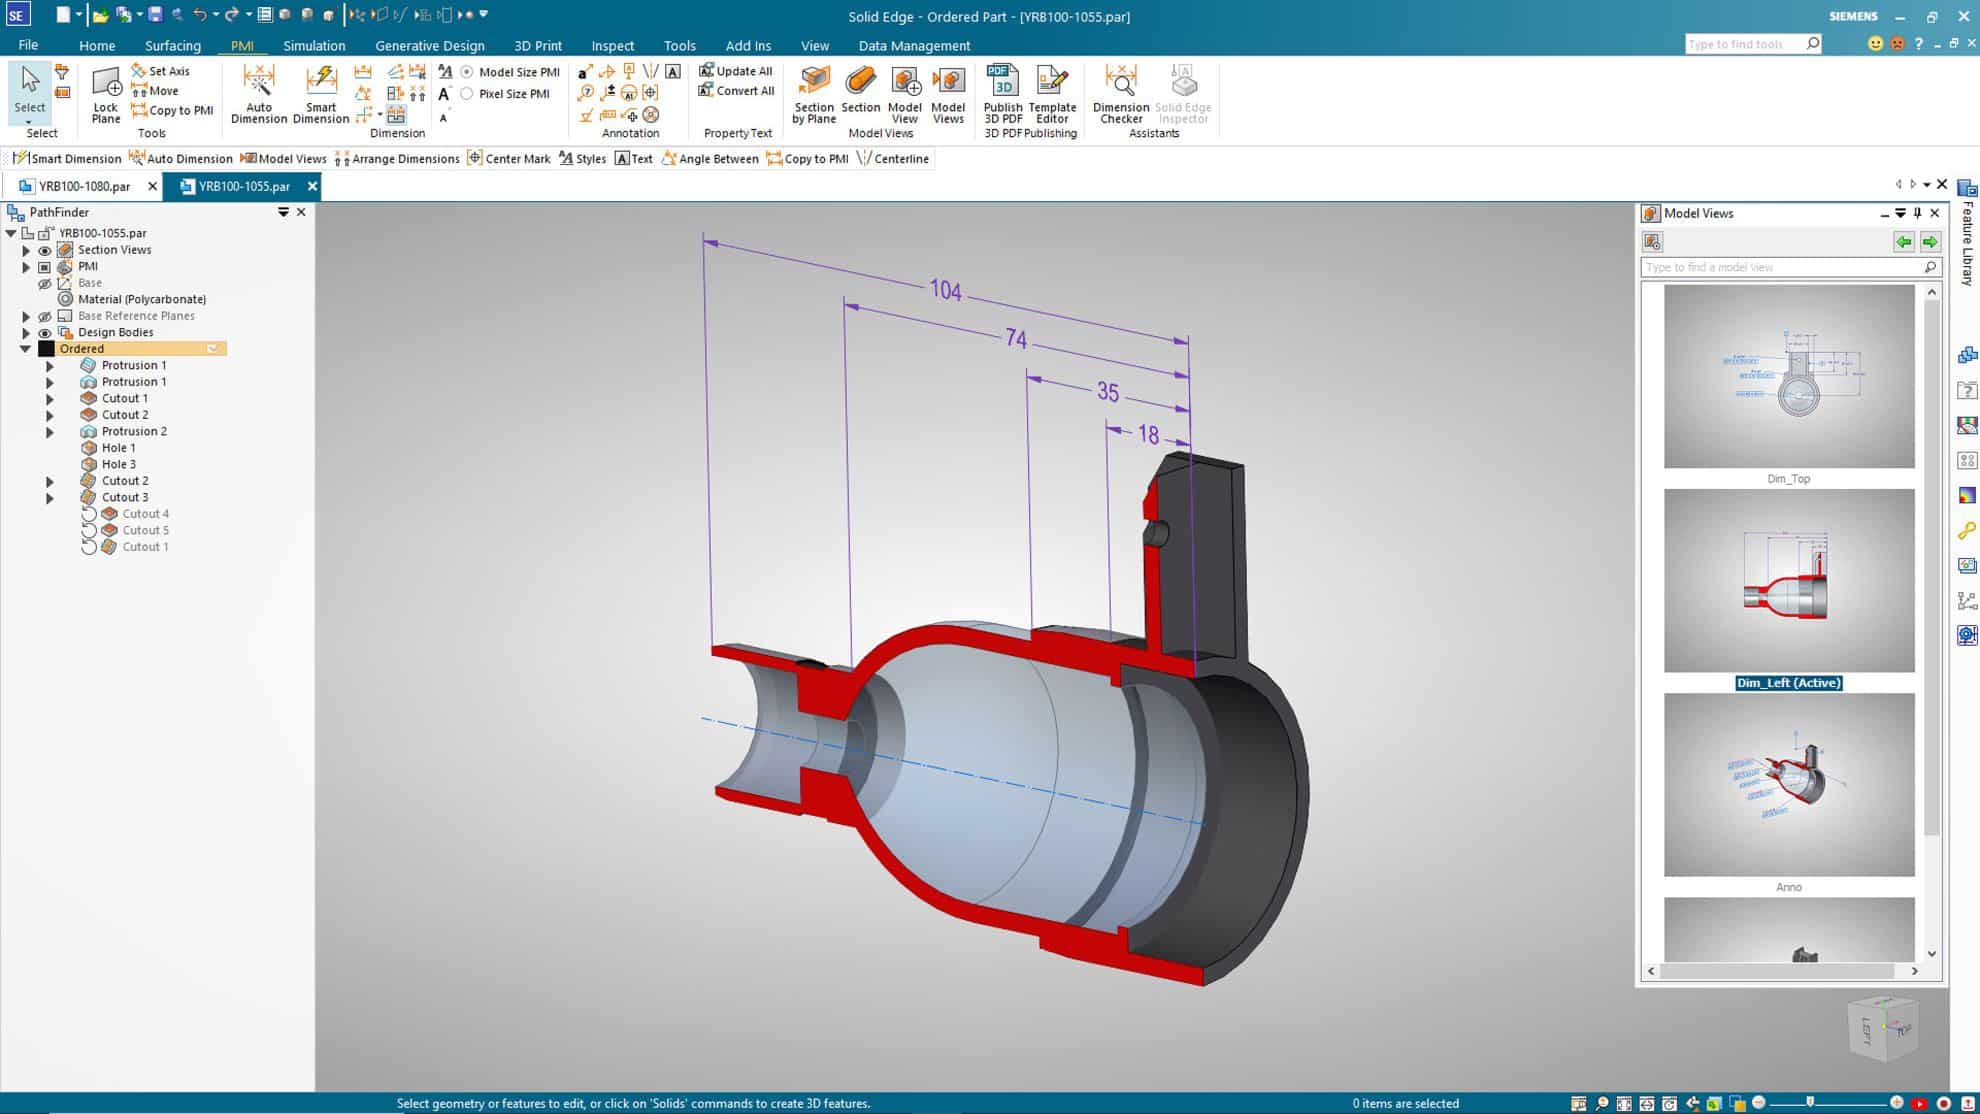 Solid Edge is a portfolio of affordable, easy-to-use software tools that addresses all aspects of the product development process–3D design, simulation, manufacturing, data management and more.